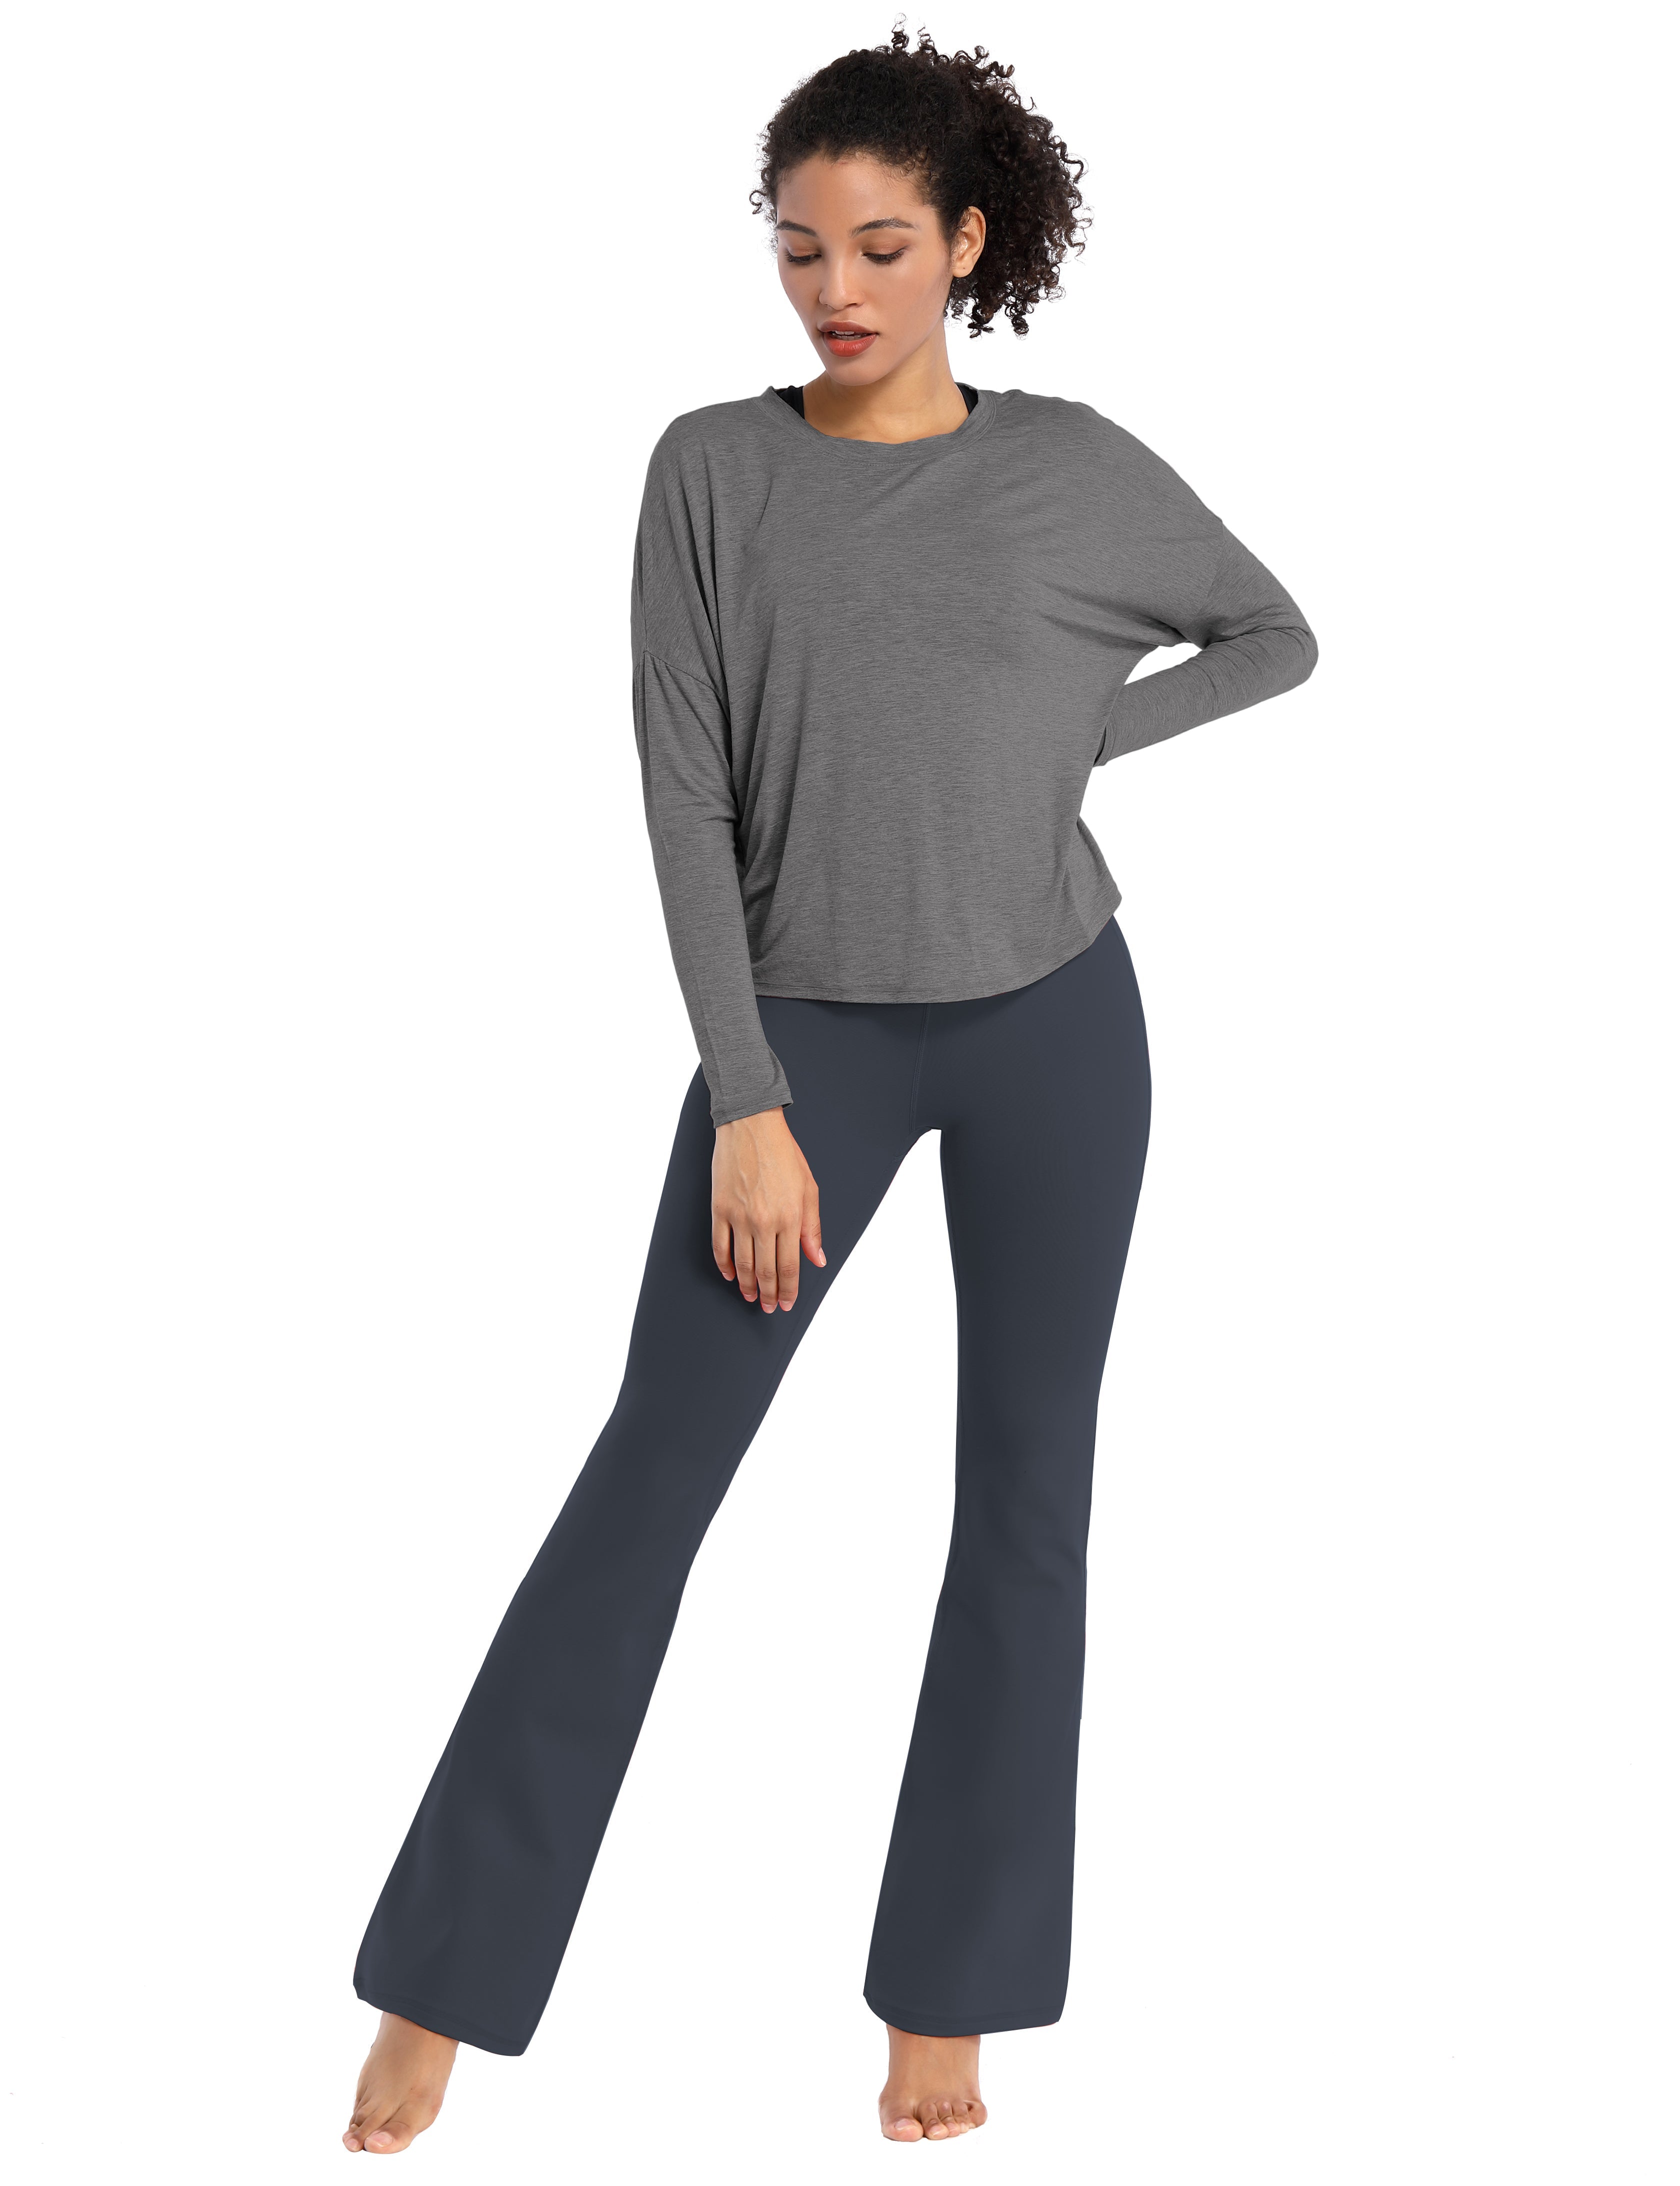 Cotton Nylon Bootcut Leggings shadowcharcoal 87%Nylon/13%Spandex (Super soft, cotton feel , 280gsm) Fabric doesn't attract lint easily 4-way stretch No see-through Moisture-wicking Inner pocket Four lengths